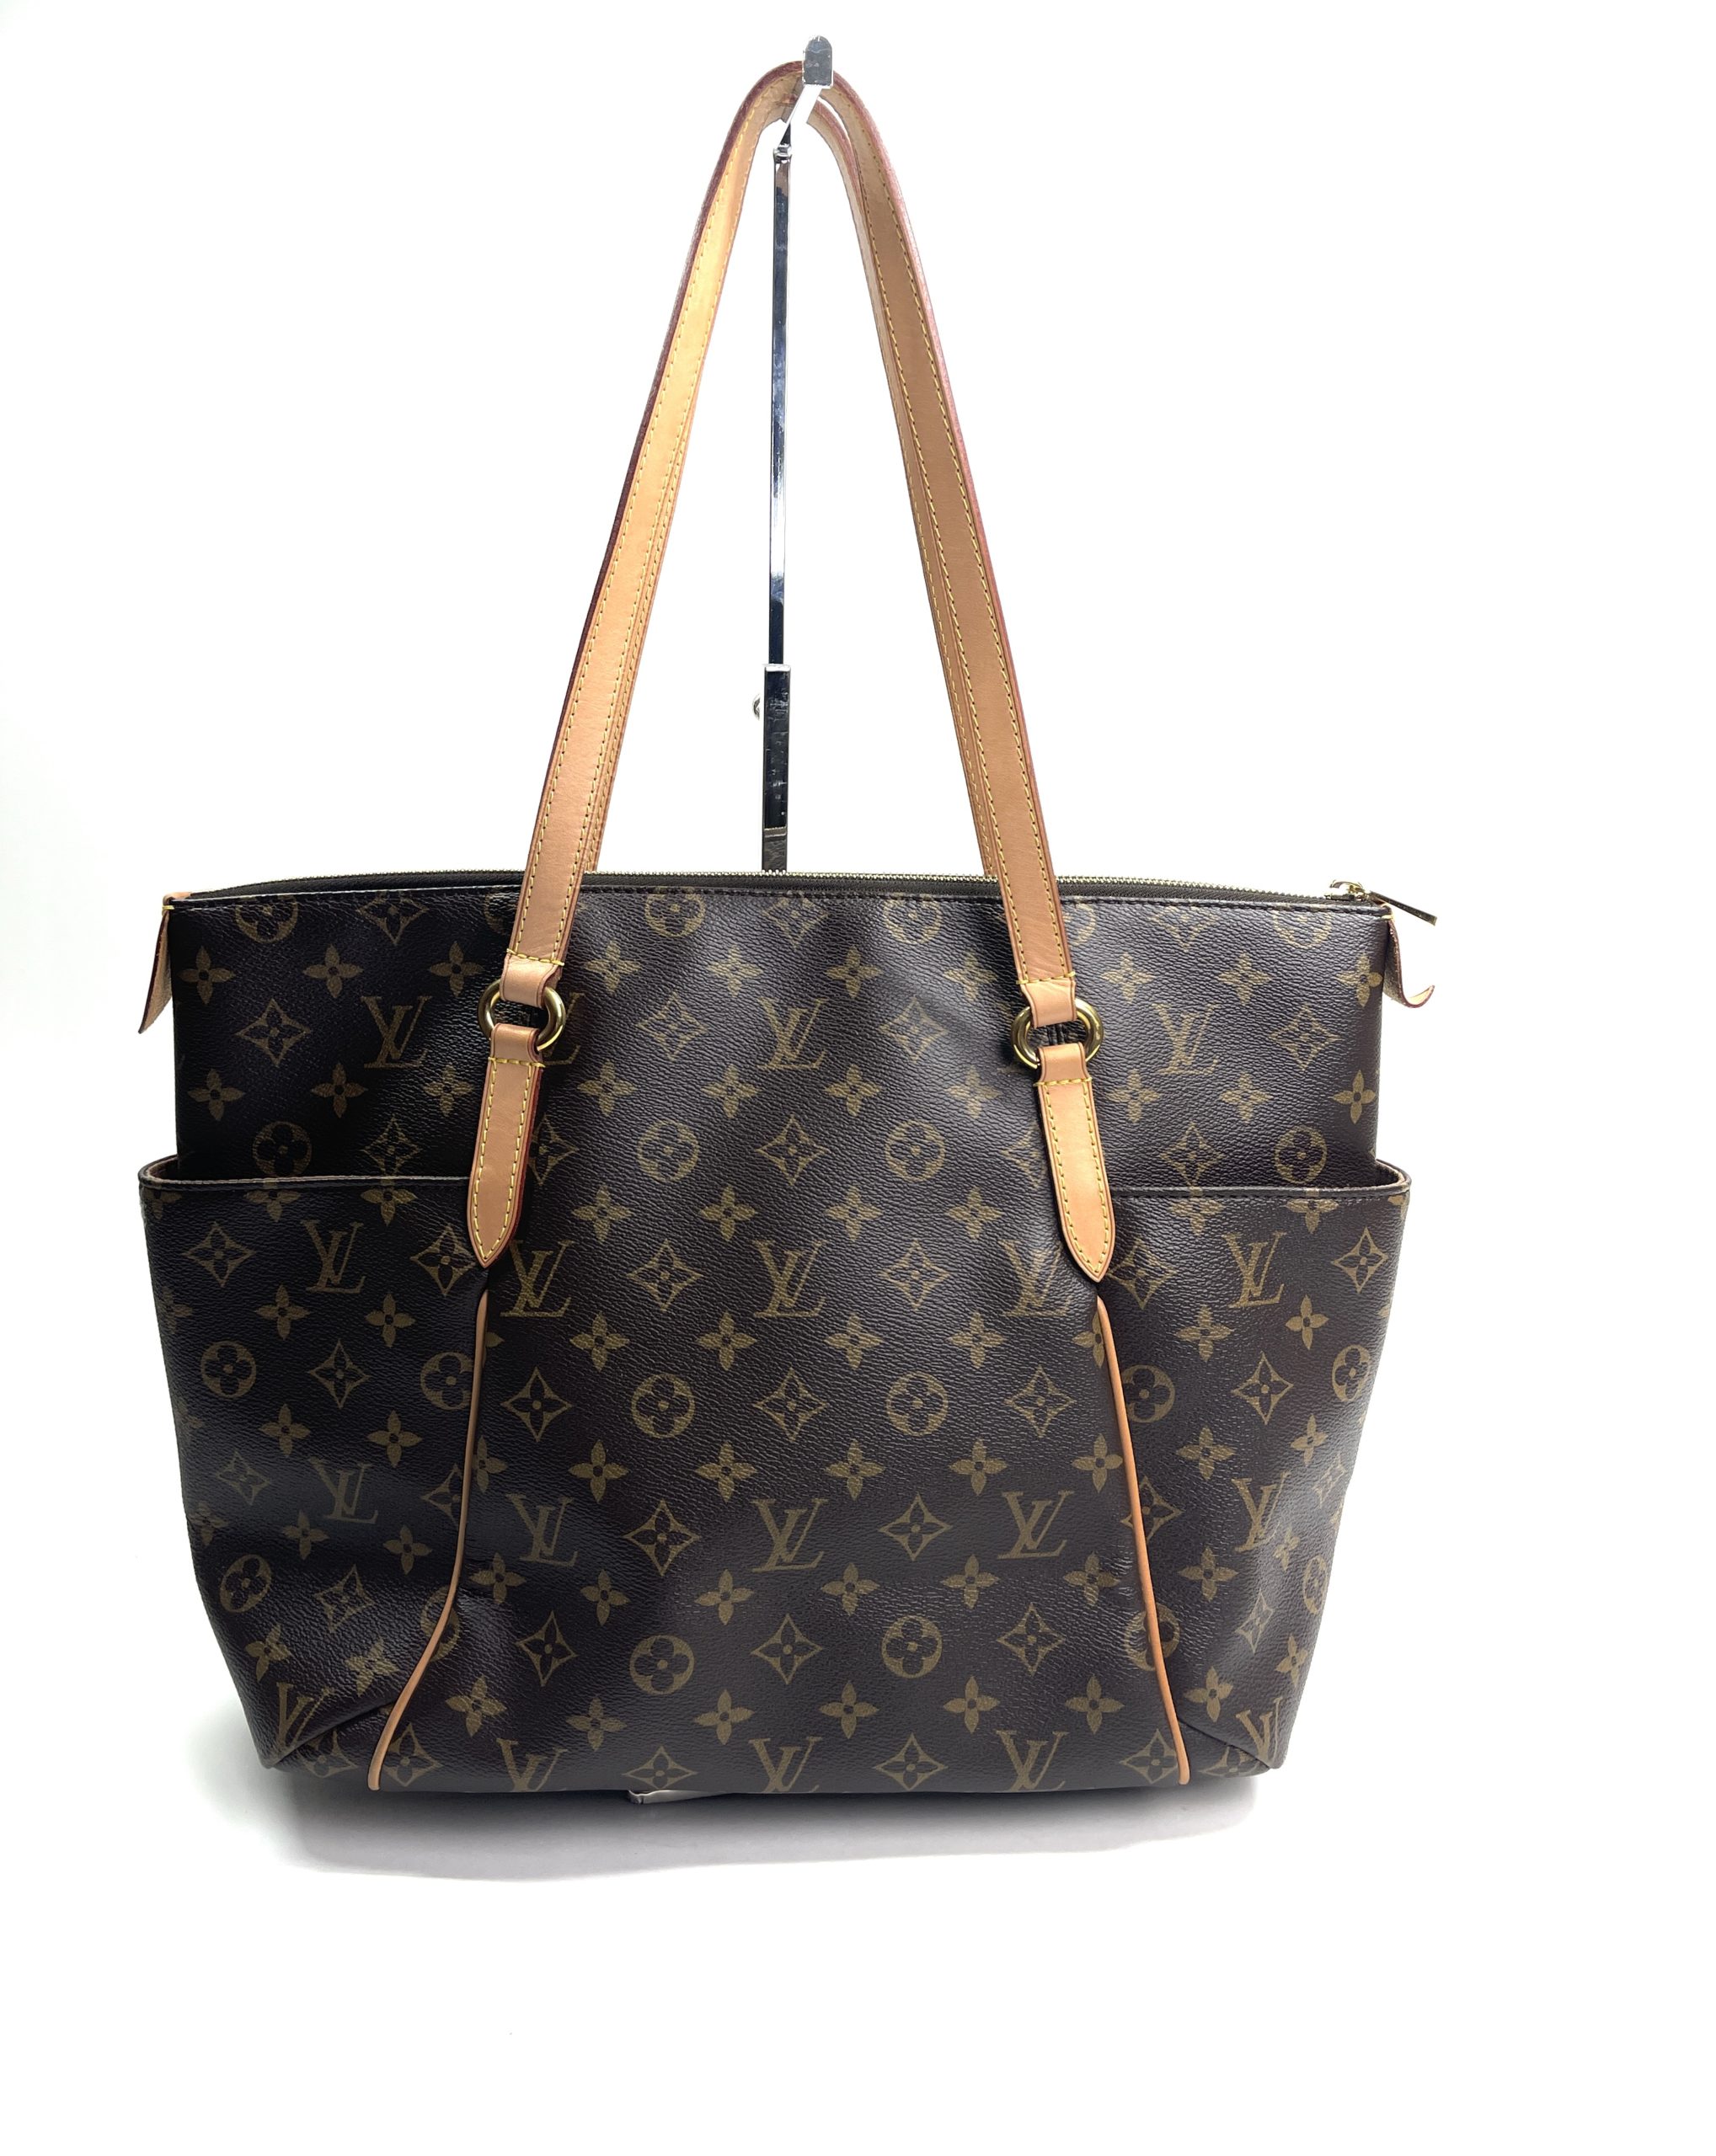 Stephen sprouse boston cloth tote Louis Vuitton Brown in Cloth